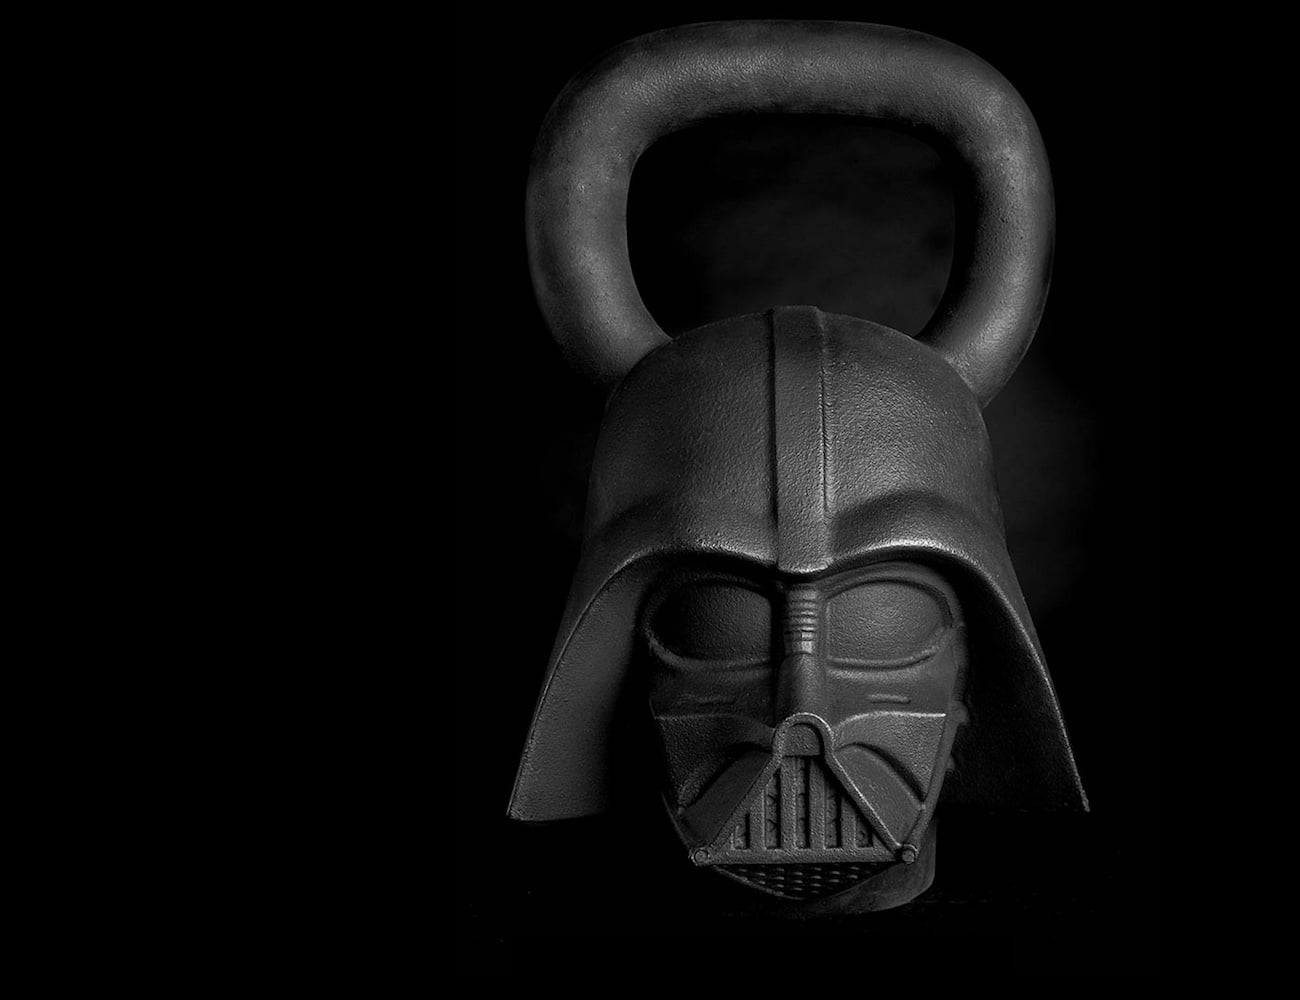 Onnit Star Wars Functional Fitness Equipment